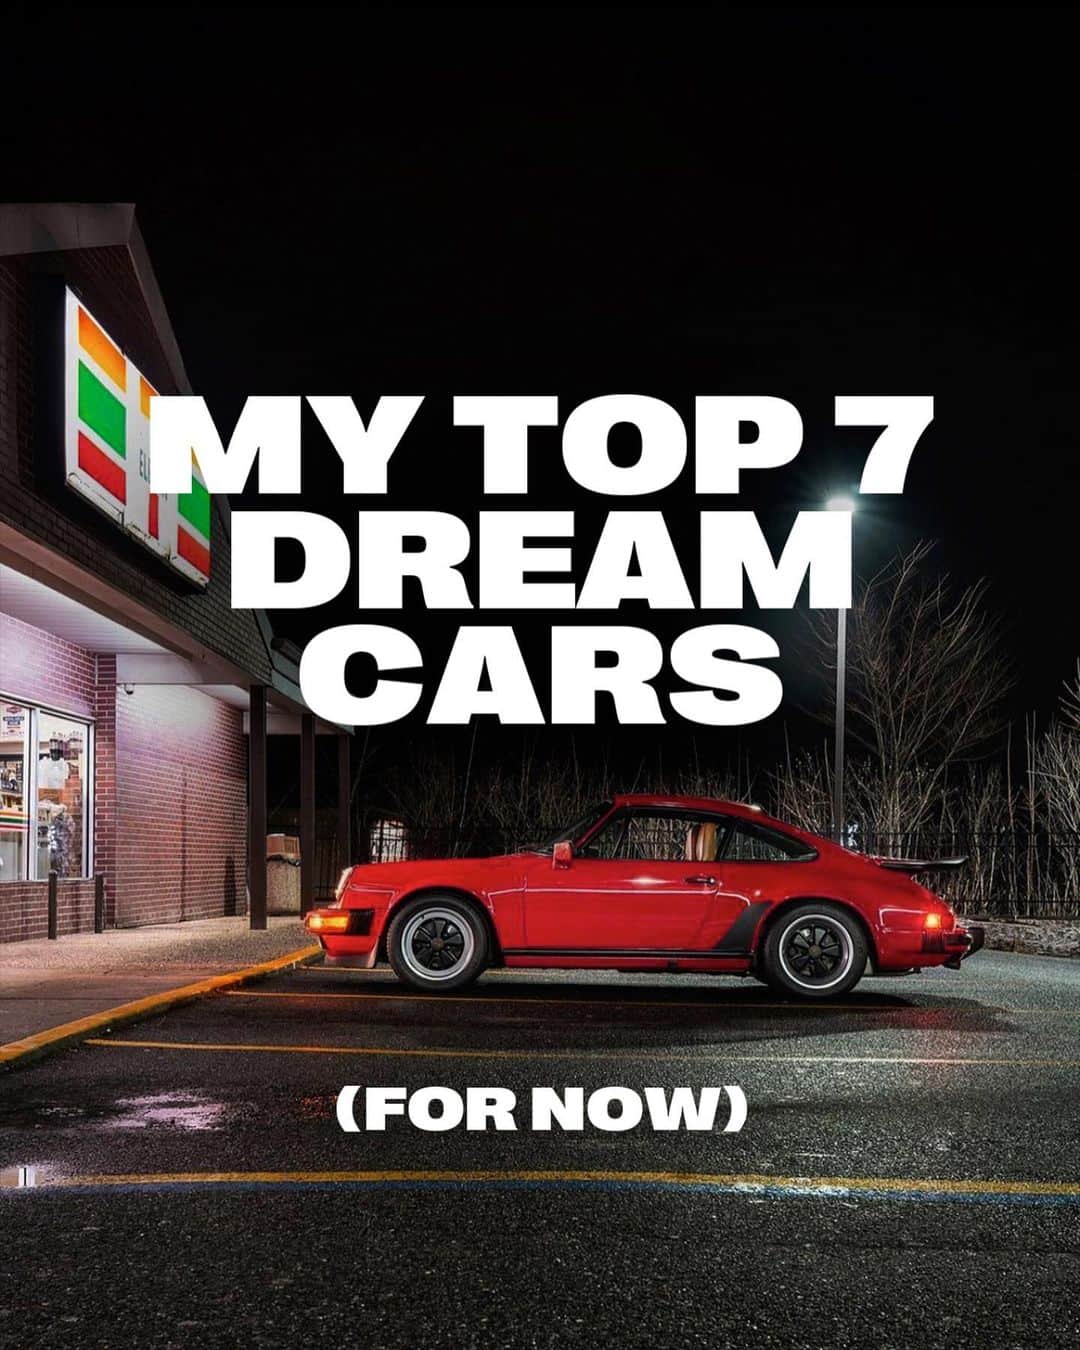 7-Eleven USAのインスタグラム：「What are your top 7 dream cars? #CarsOf7ELEVEn   @hjkphotography and @ryanfriedmanmotorcars @bbs.wheels and @corvettesweepstakes and @alexthespangler @zn6ed and @r.xix.a @fullsend.automotive and @_all_the_power_ @supzlla ft. @bedistinct_ and @dragonsbreath.us @cosmos.captures」